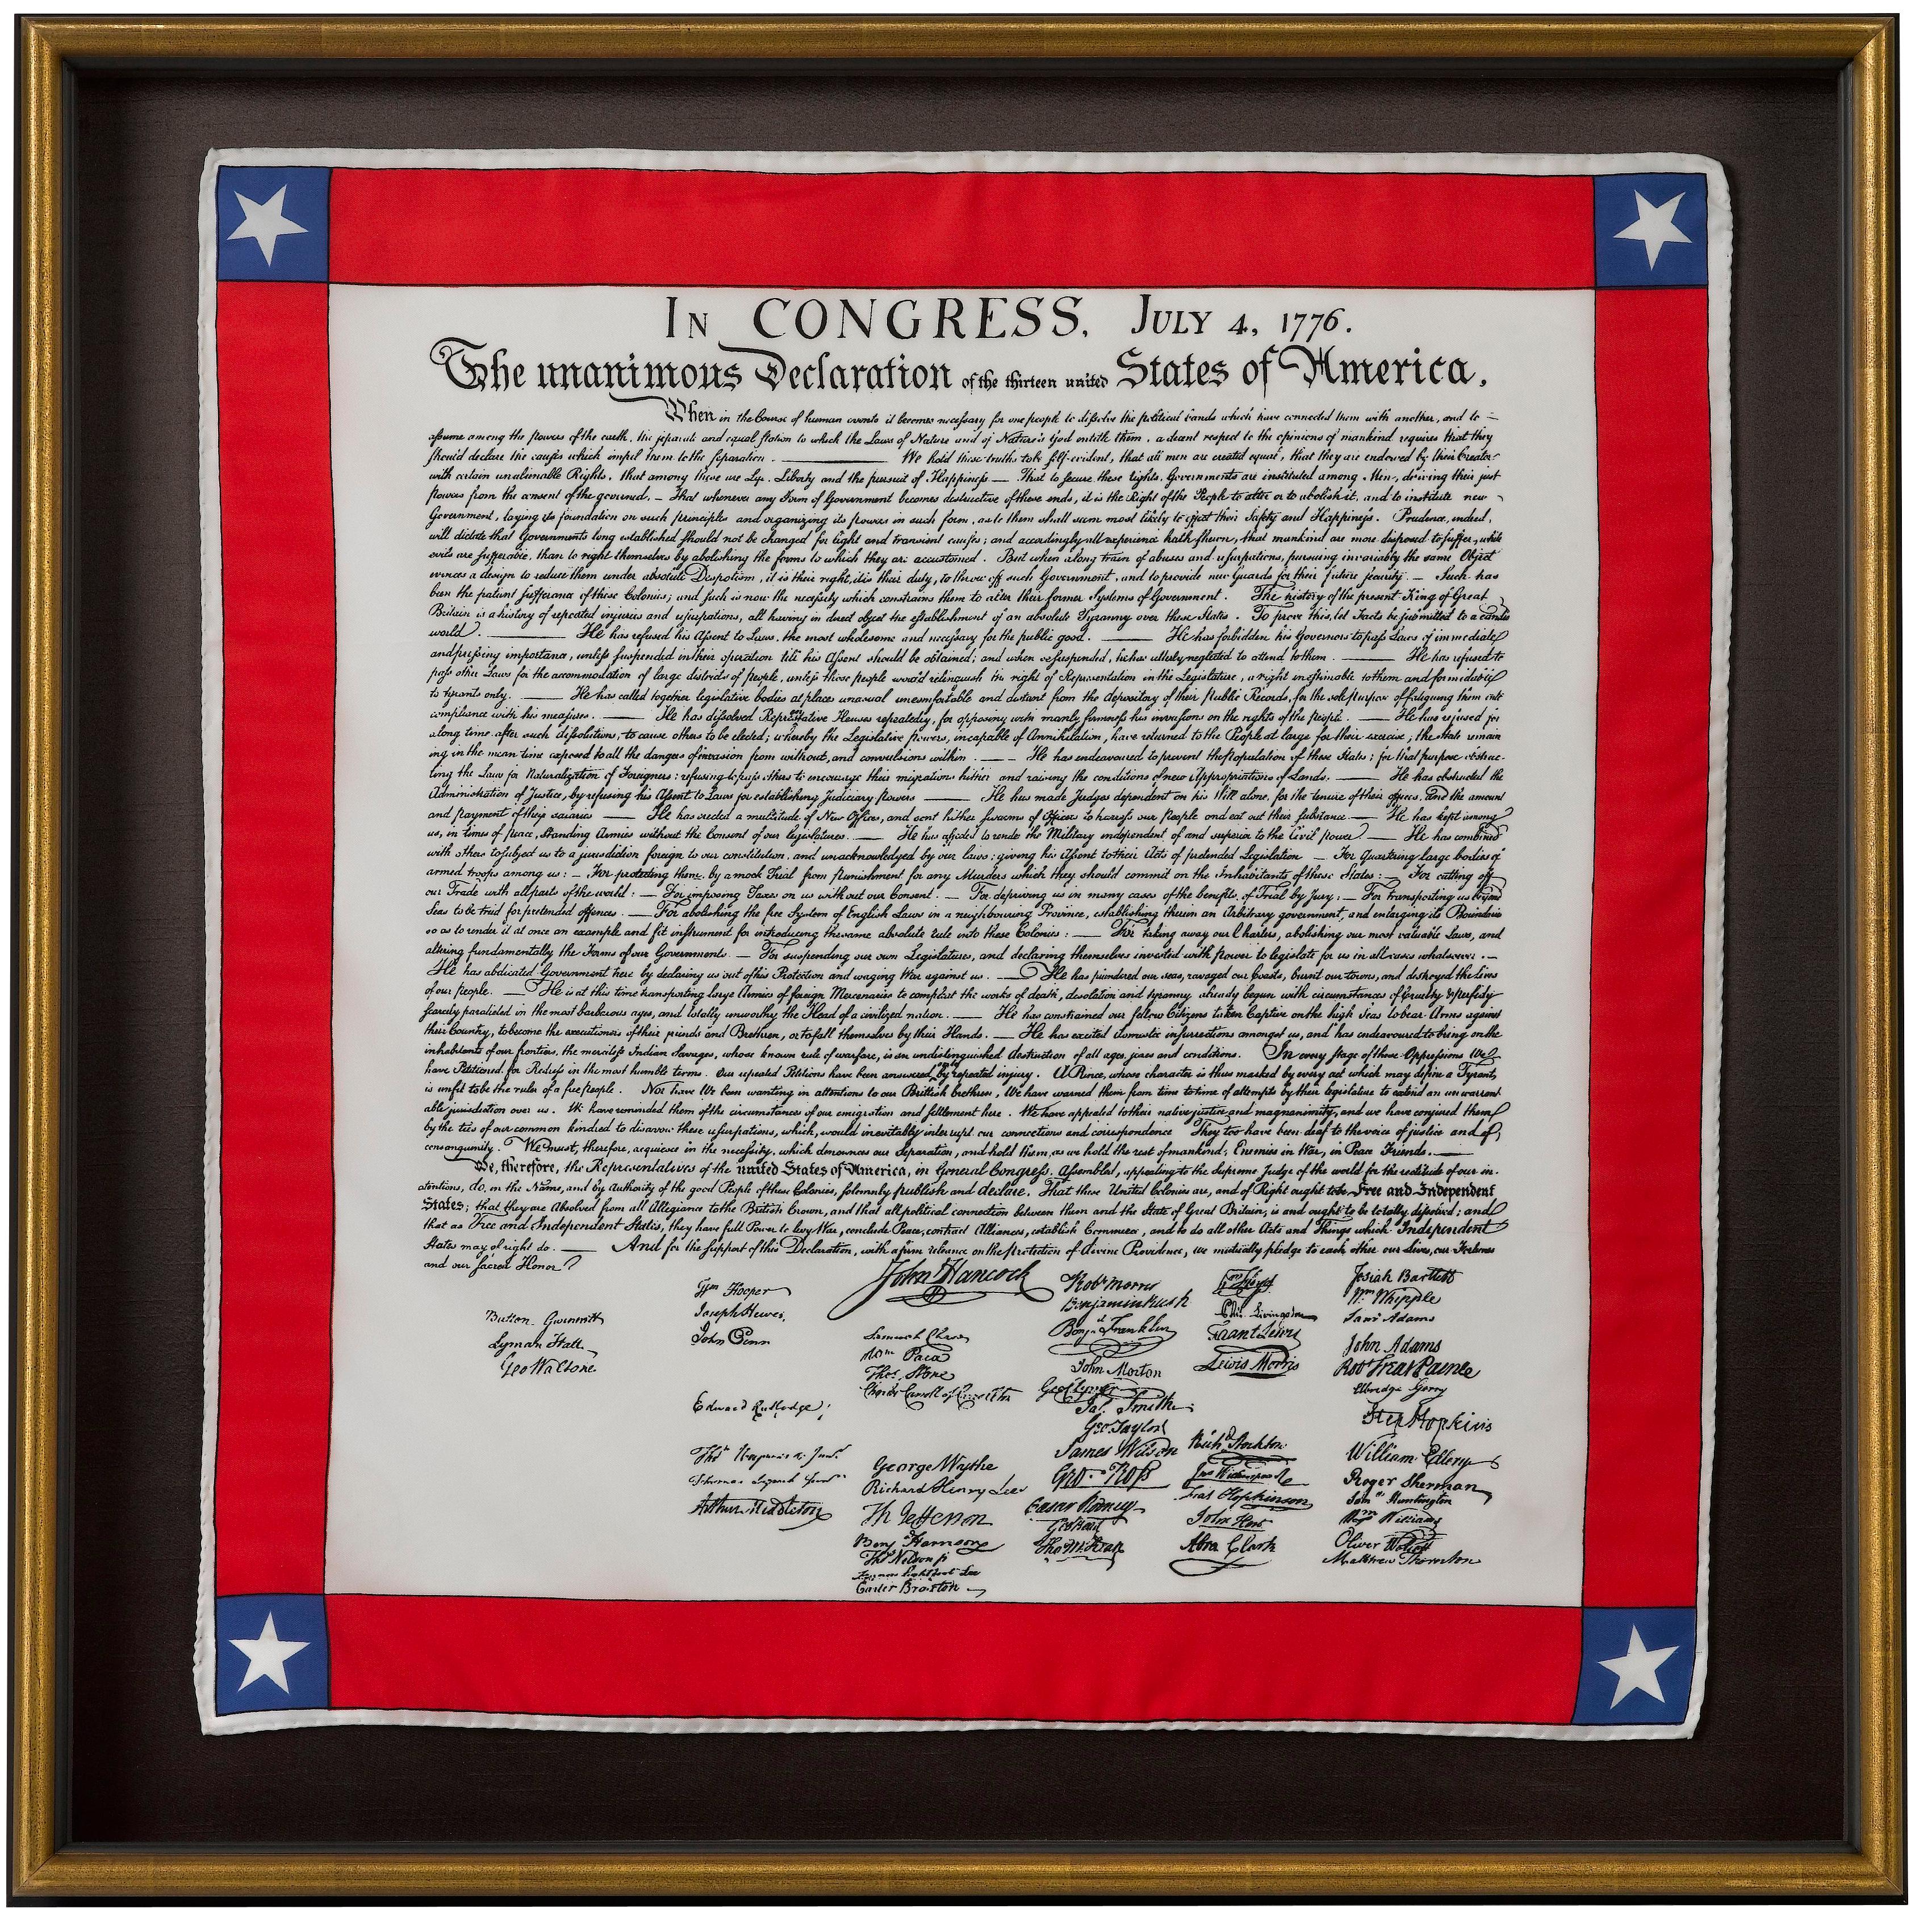 Presented is a patriotic silk scarf, celebrating the Declaration of Independence. At center of the silk scarf design is artistic rendering of the Declaration of Independence. The famous text and signatures are printed in black ink on white silk. A